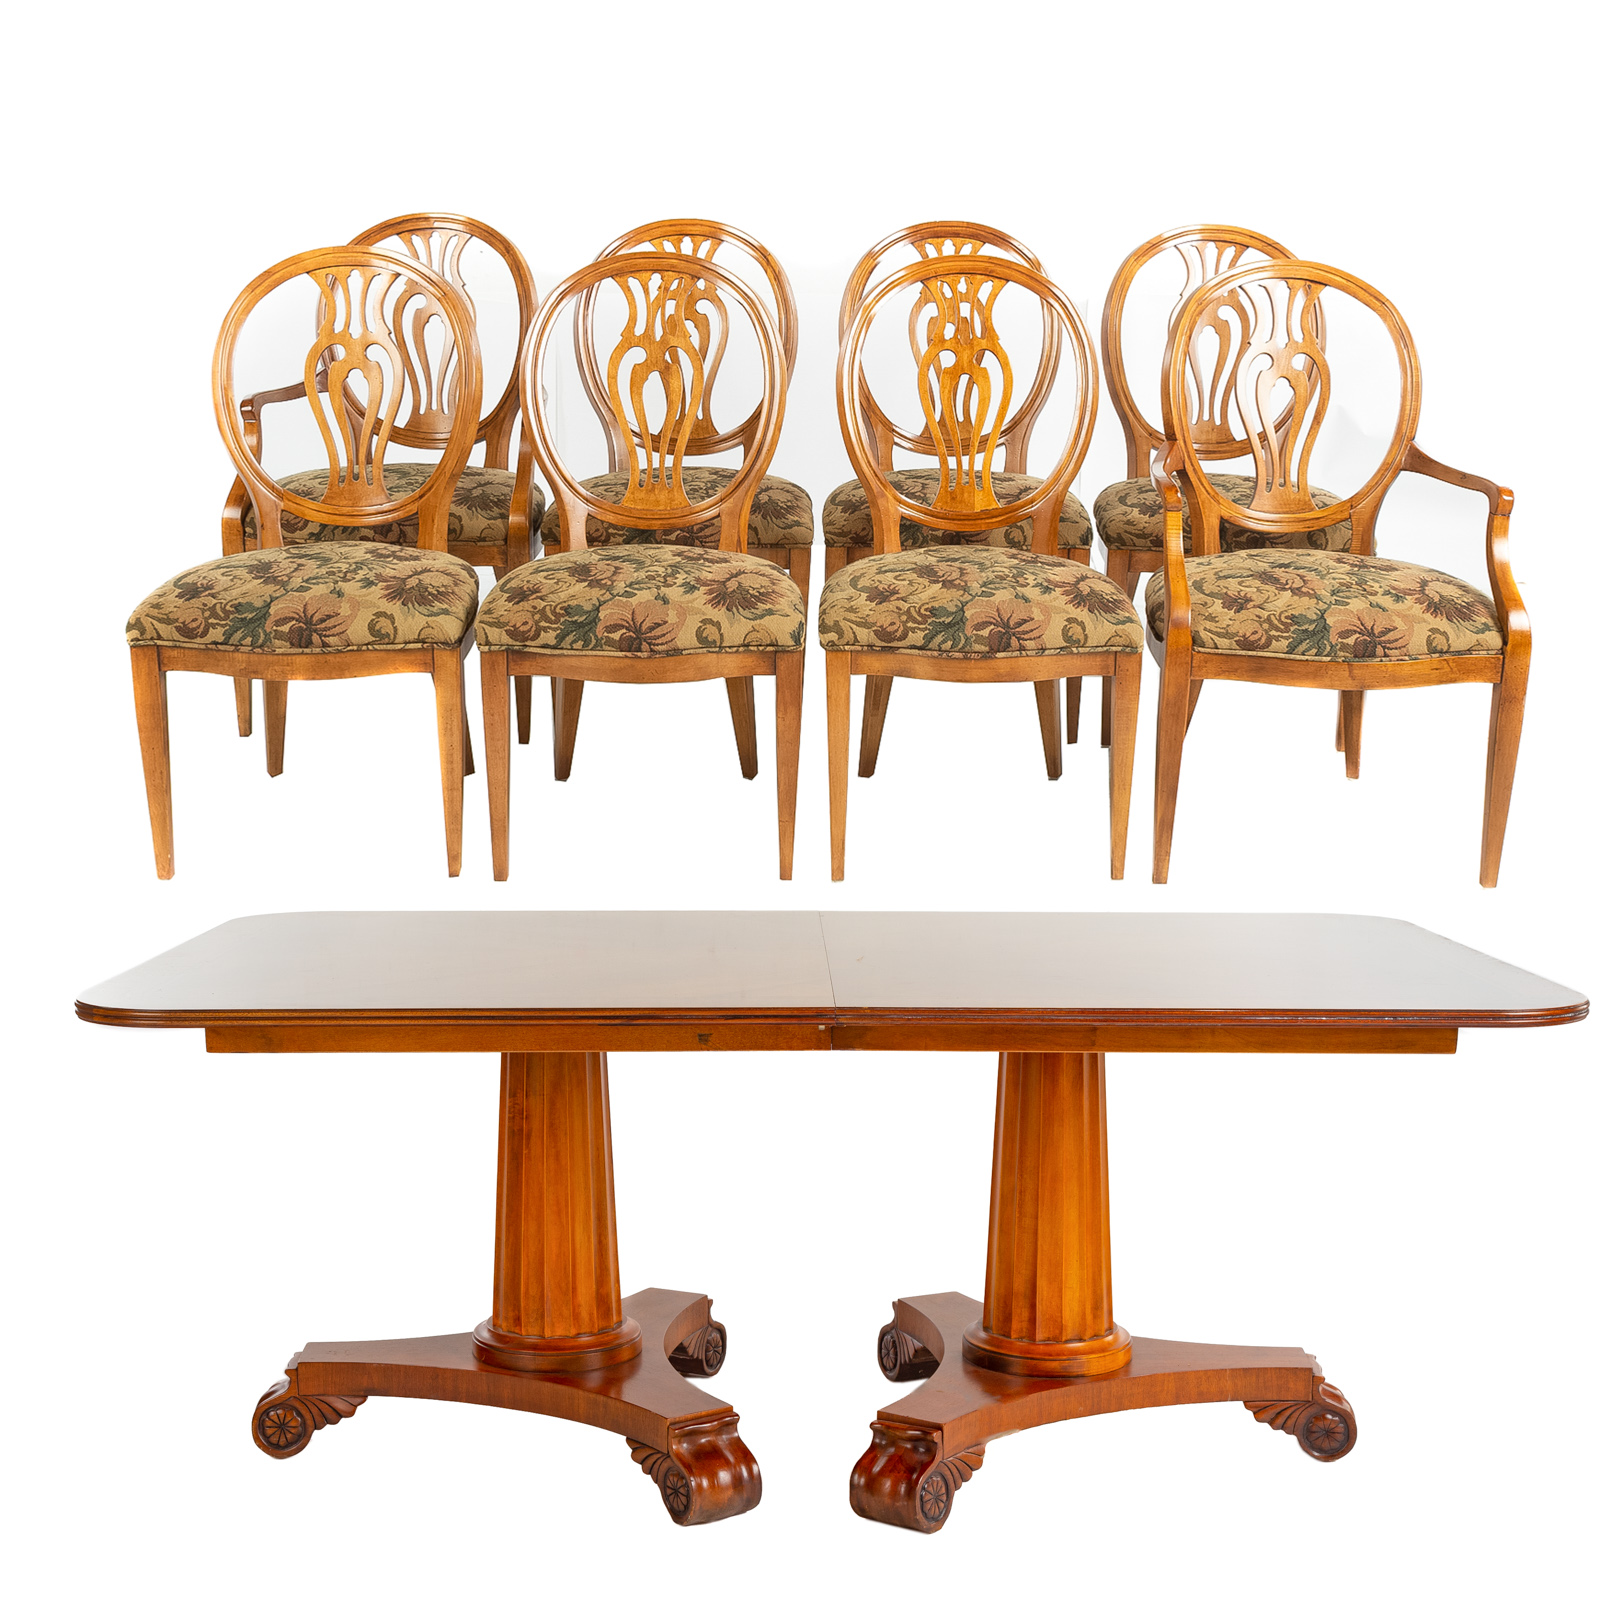 HENREDON DINING TABLE EIGHT CHAIRS 369952